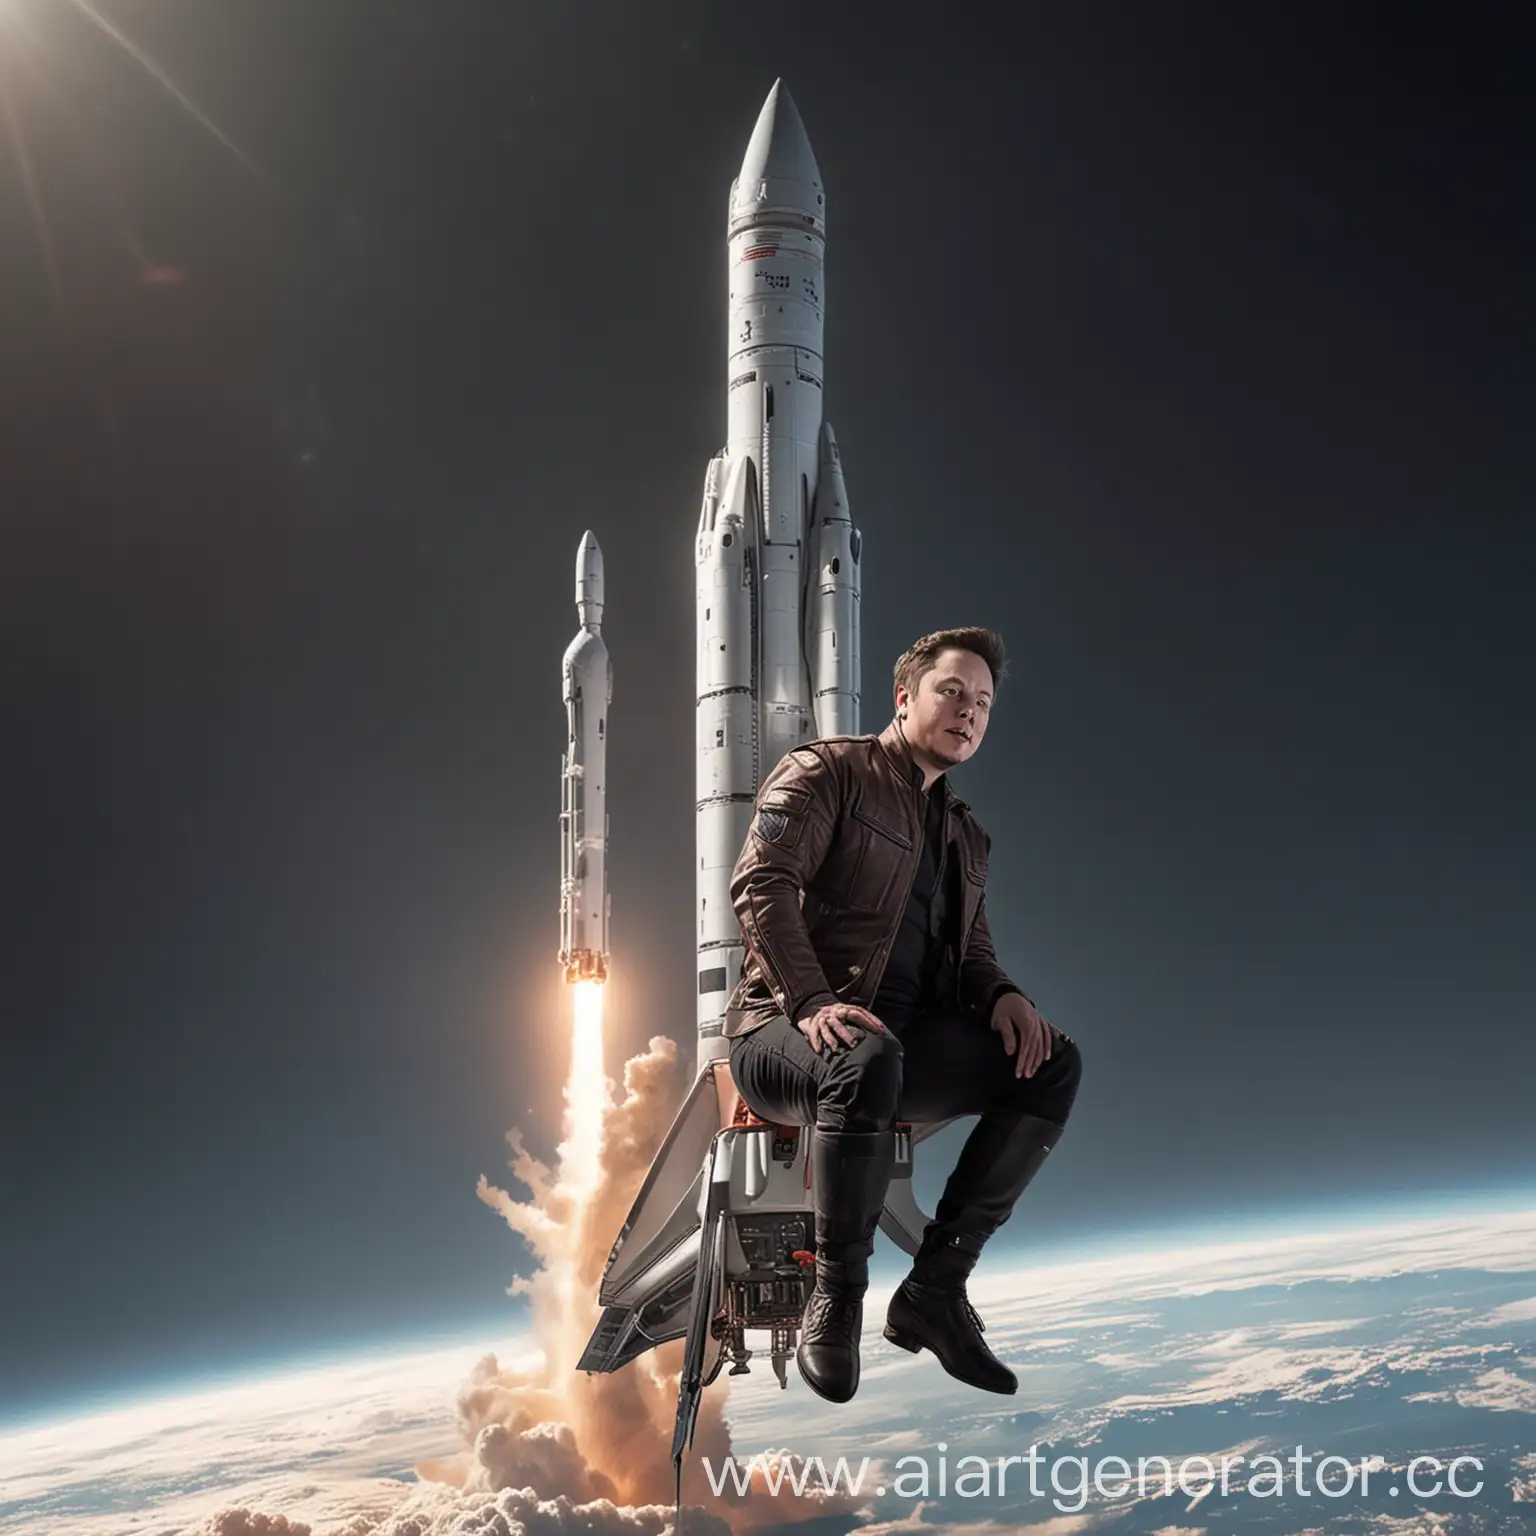 Elon-Musk-Flying-on-Rocket-with-Earth-Observation